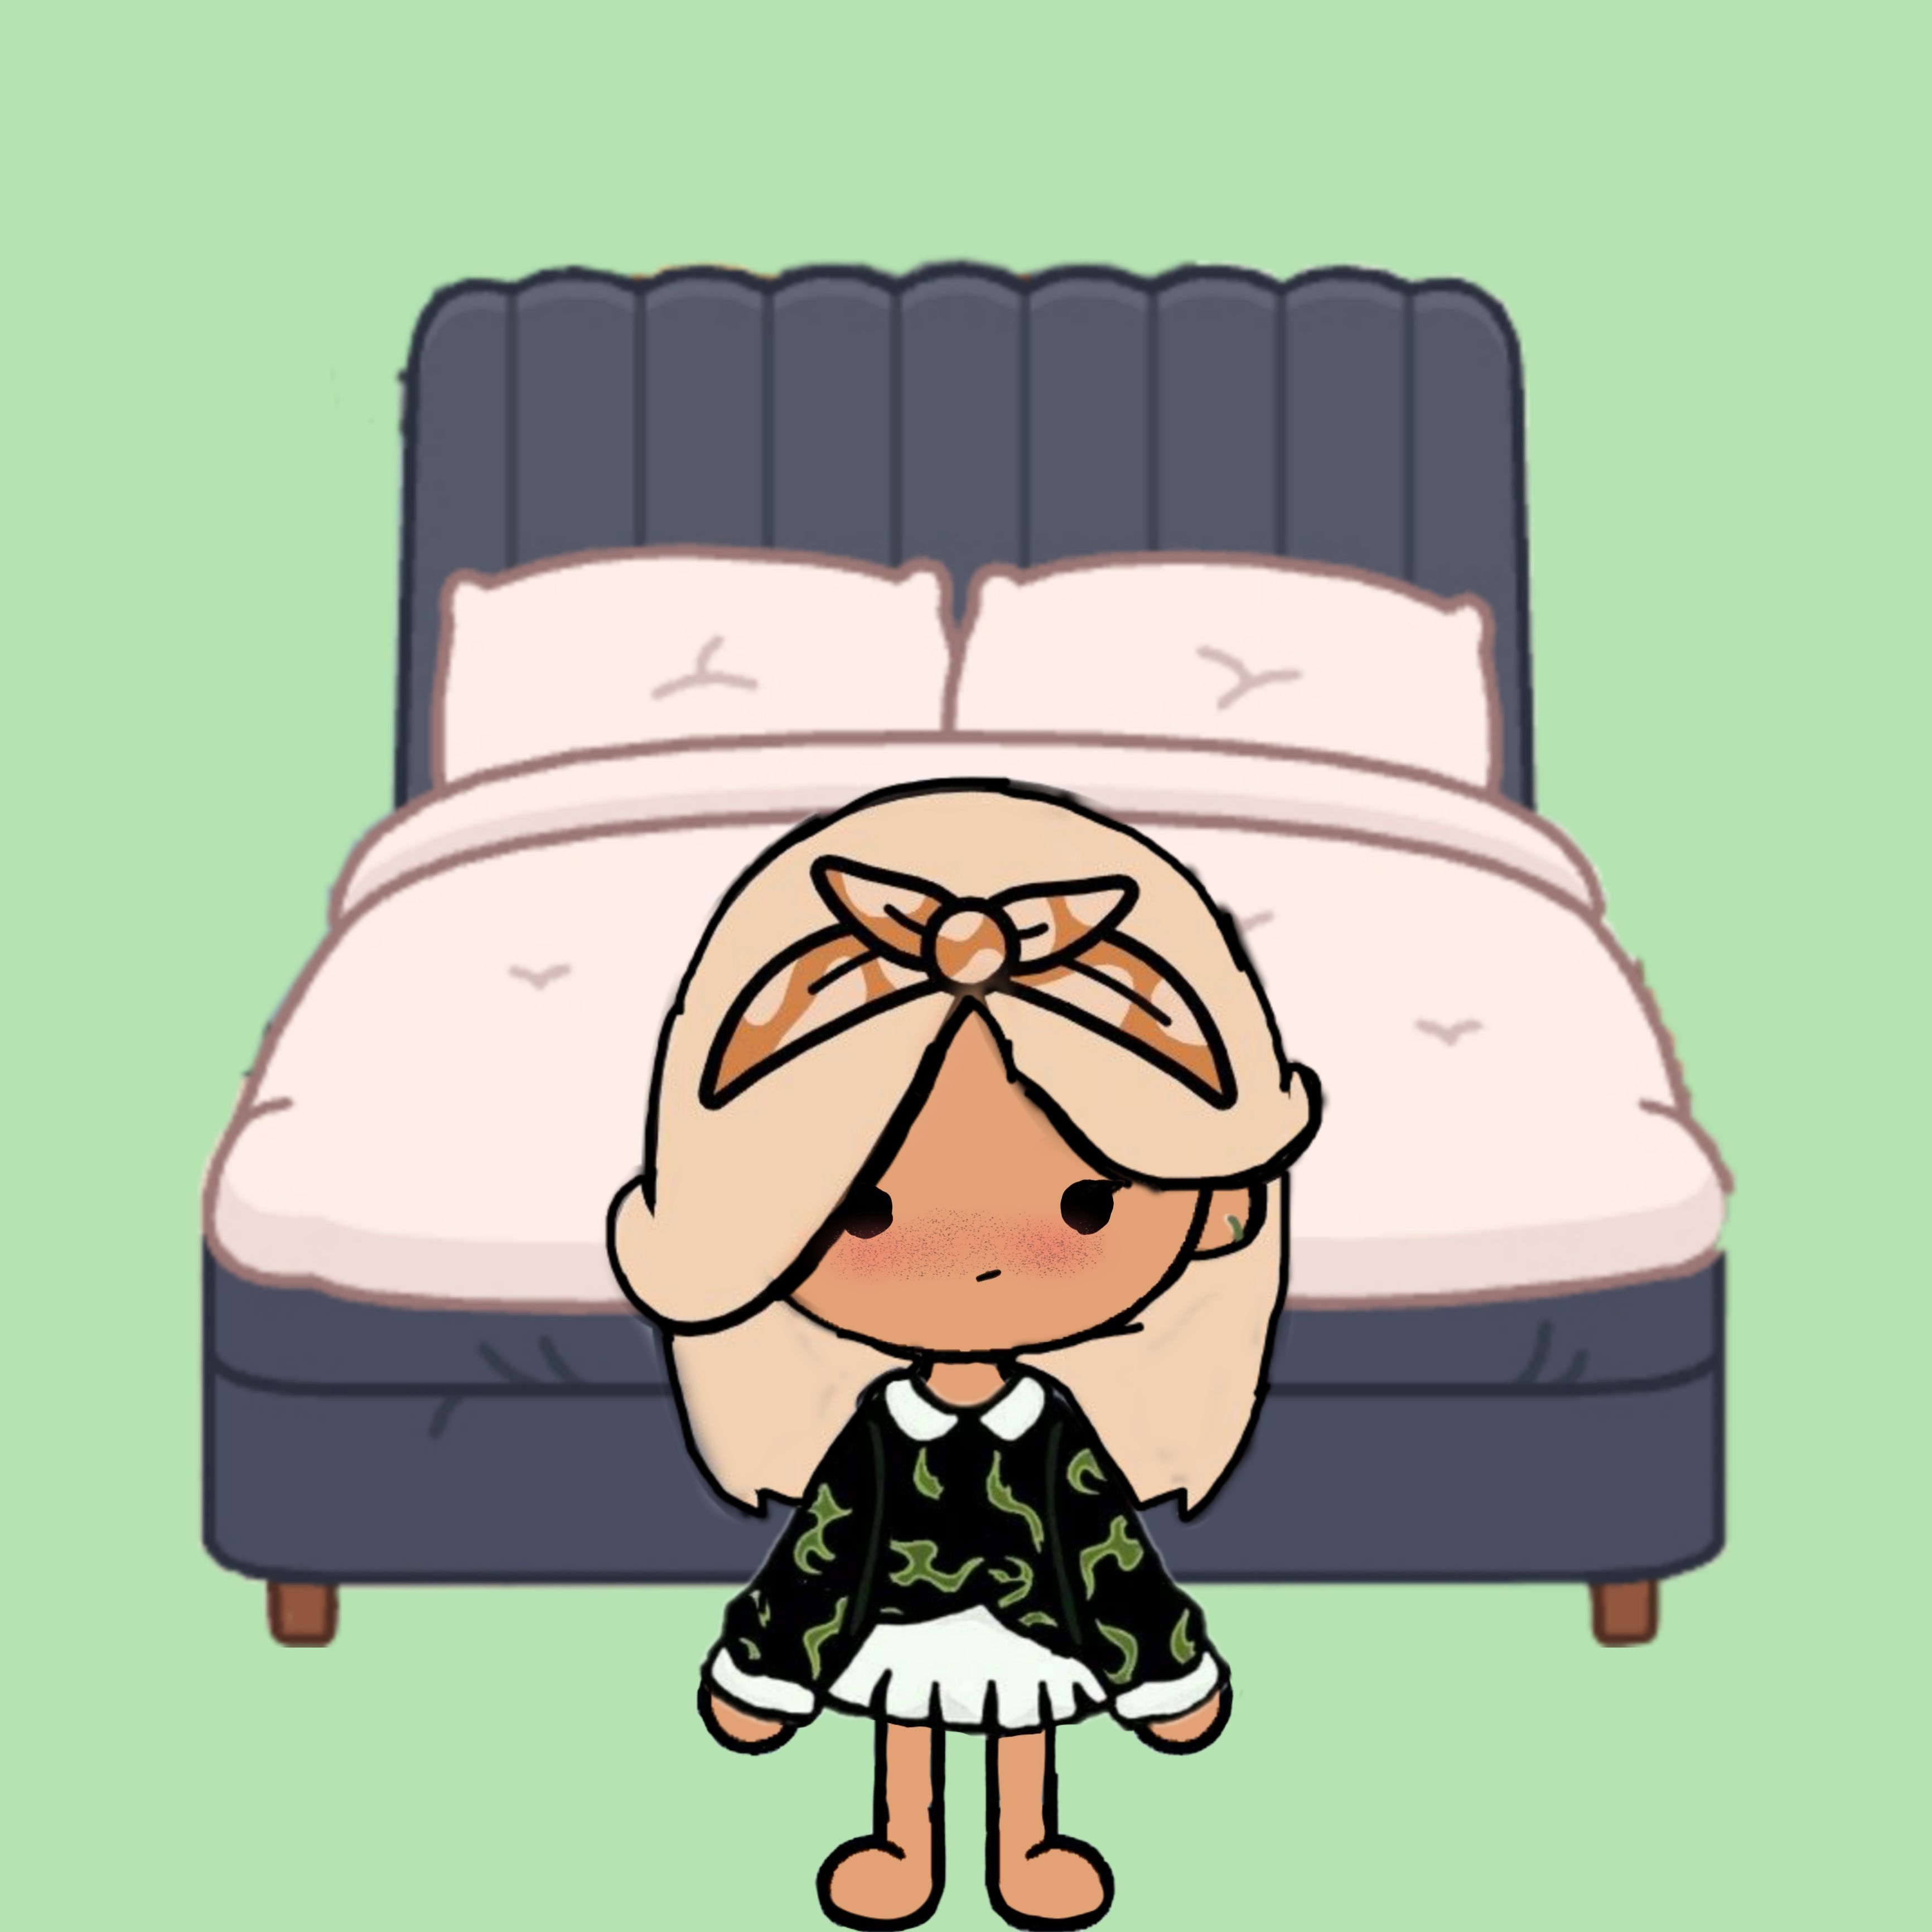 A cartoon girl with blonde hair wearing a black dress with green patterns on it and a white frilly skirt. She is standing in front of a double bed with a light green background. - Toca Boca